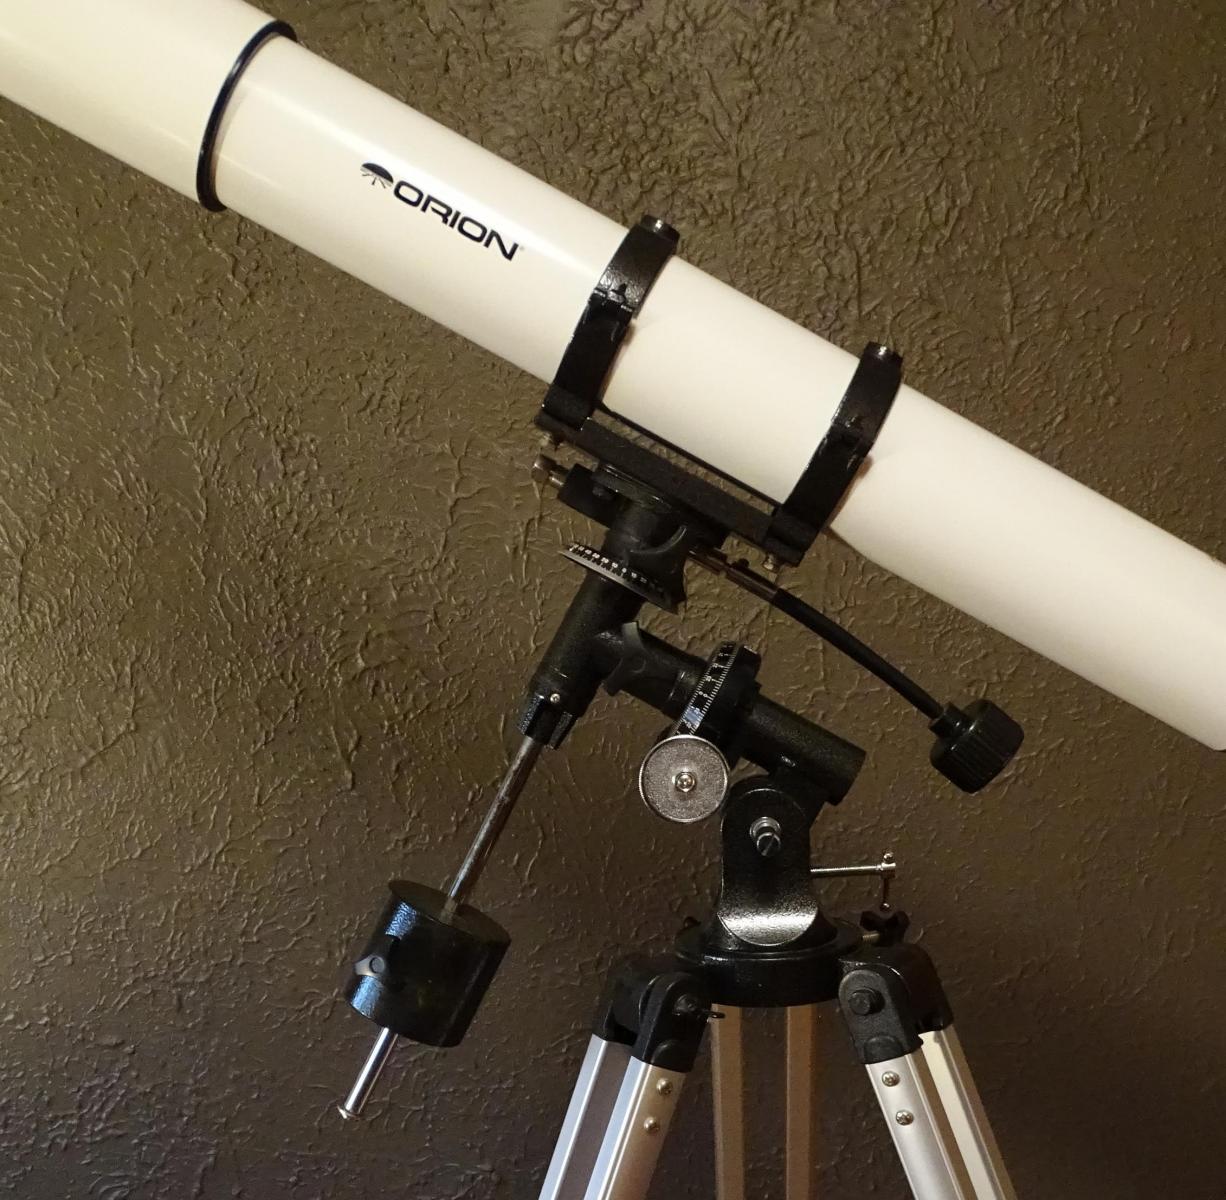 Orion Astroview 90mm EQ Equatorial Refractor and Mount - CN Classifieds Orion Astroview 90mm Eq Refractor Planetary Telescope